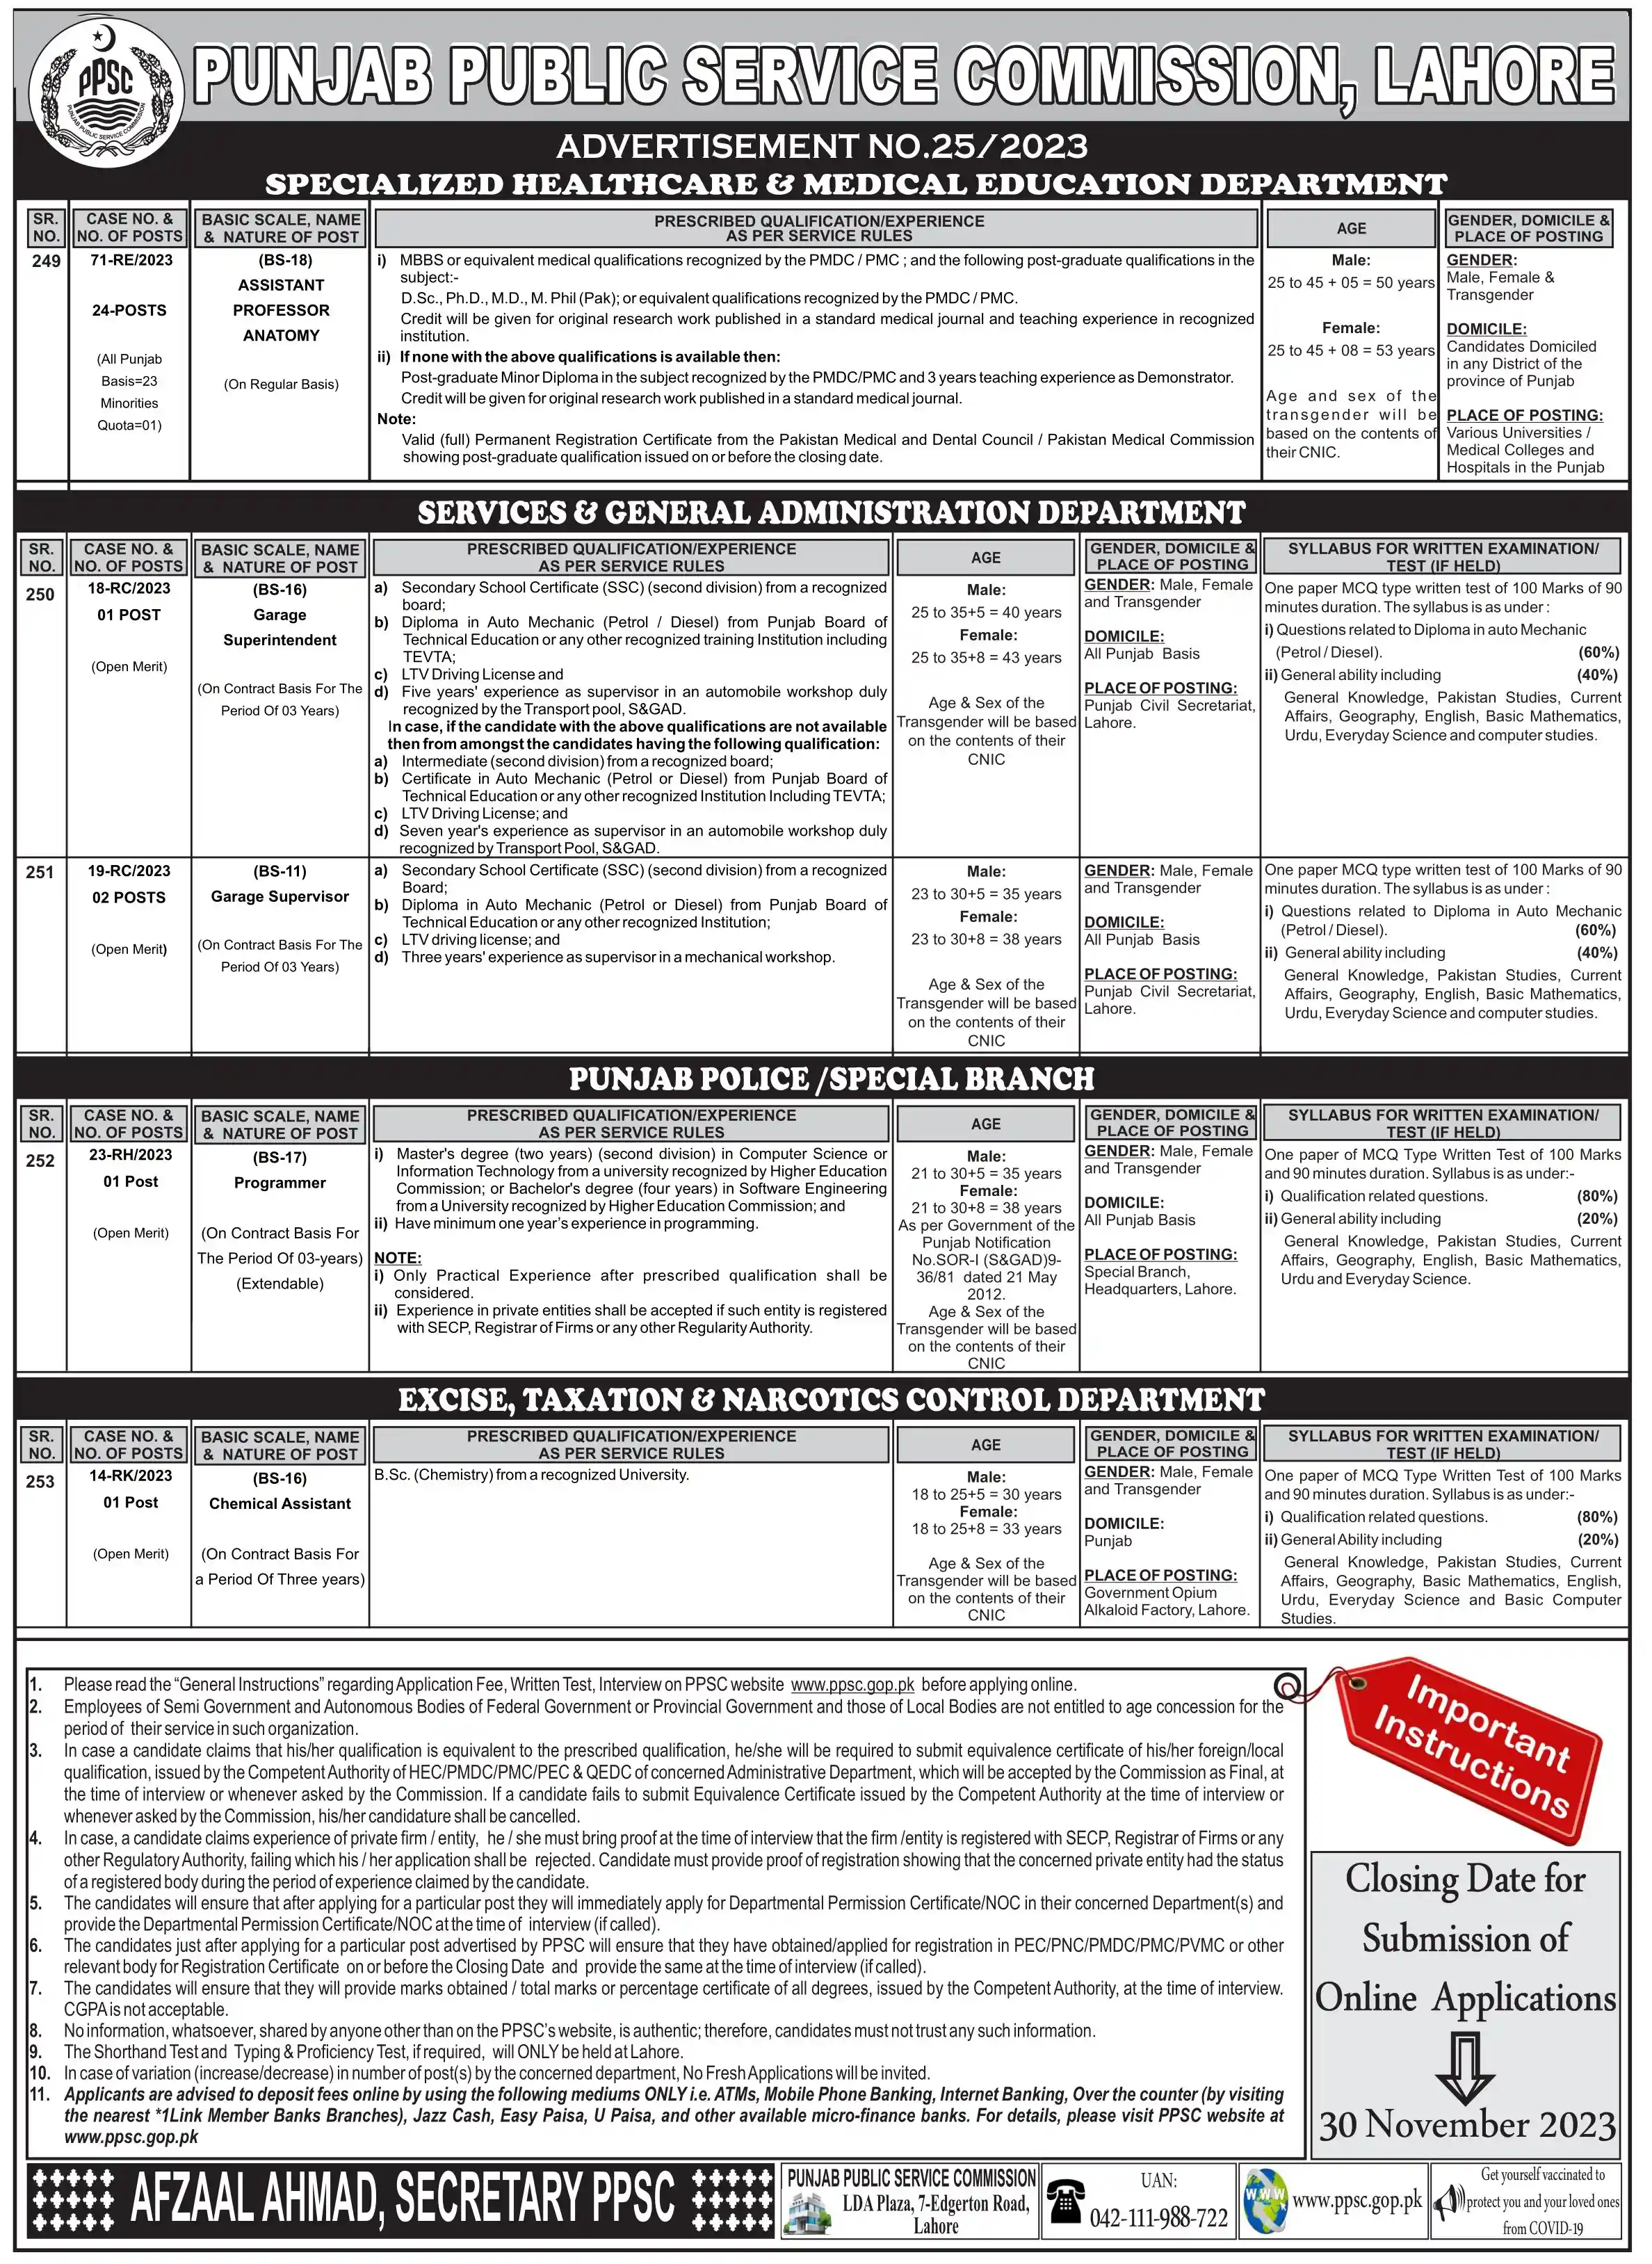 Latest PPSC Jobs Advertisement No. 11/2023: Join PPSC for Exciting Opportunities Advertisement